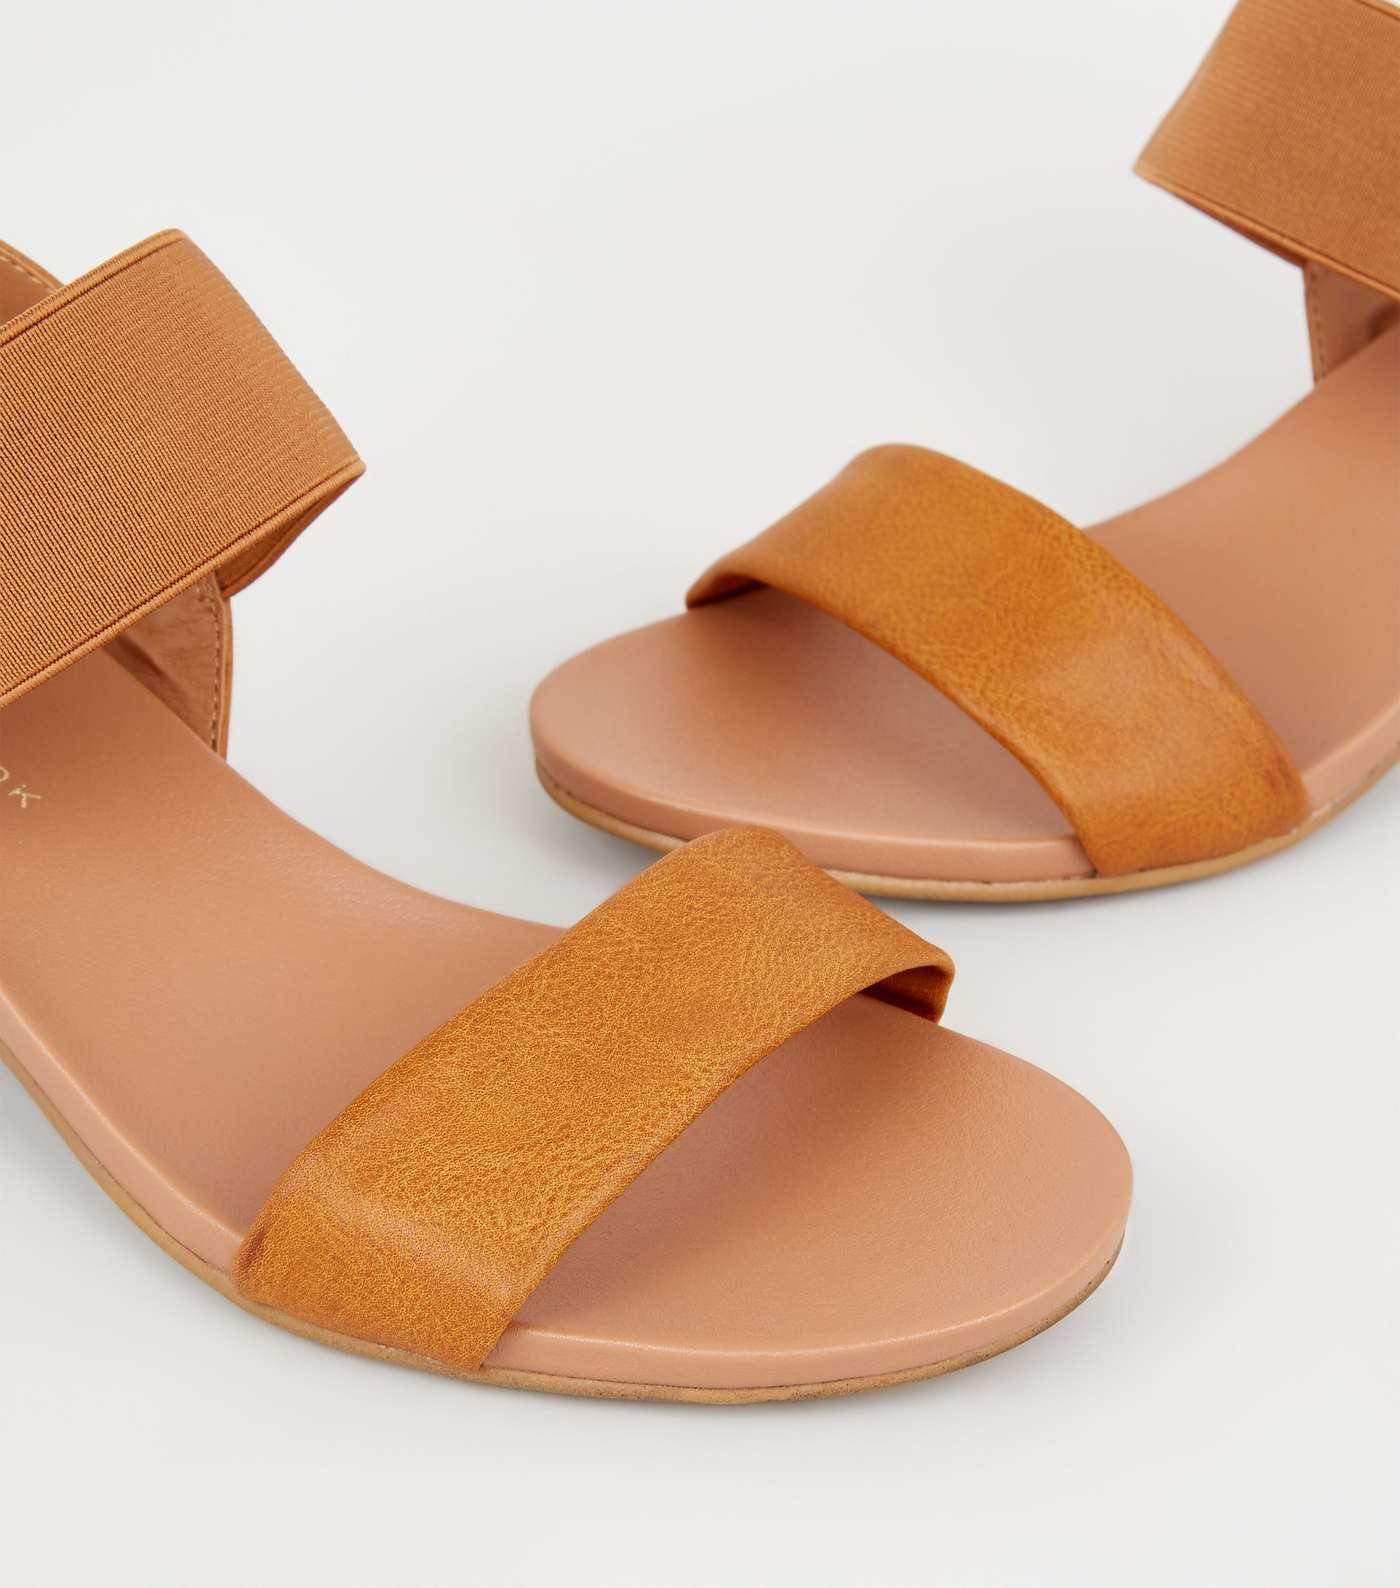 Wide Fit Tan Leather-Look Low Heel Sandals Image 3